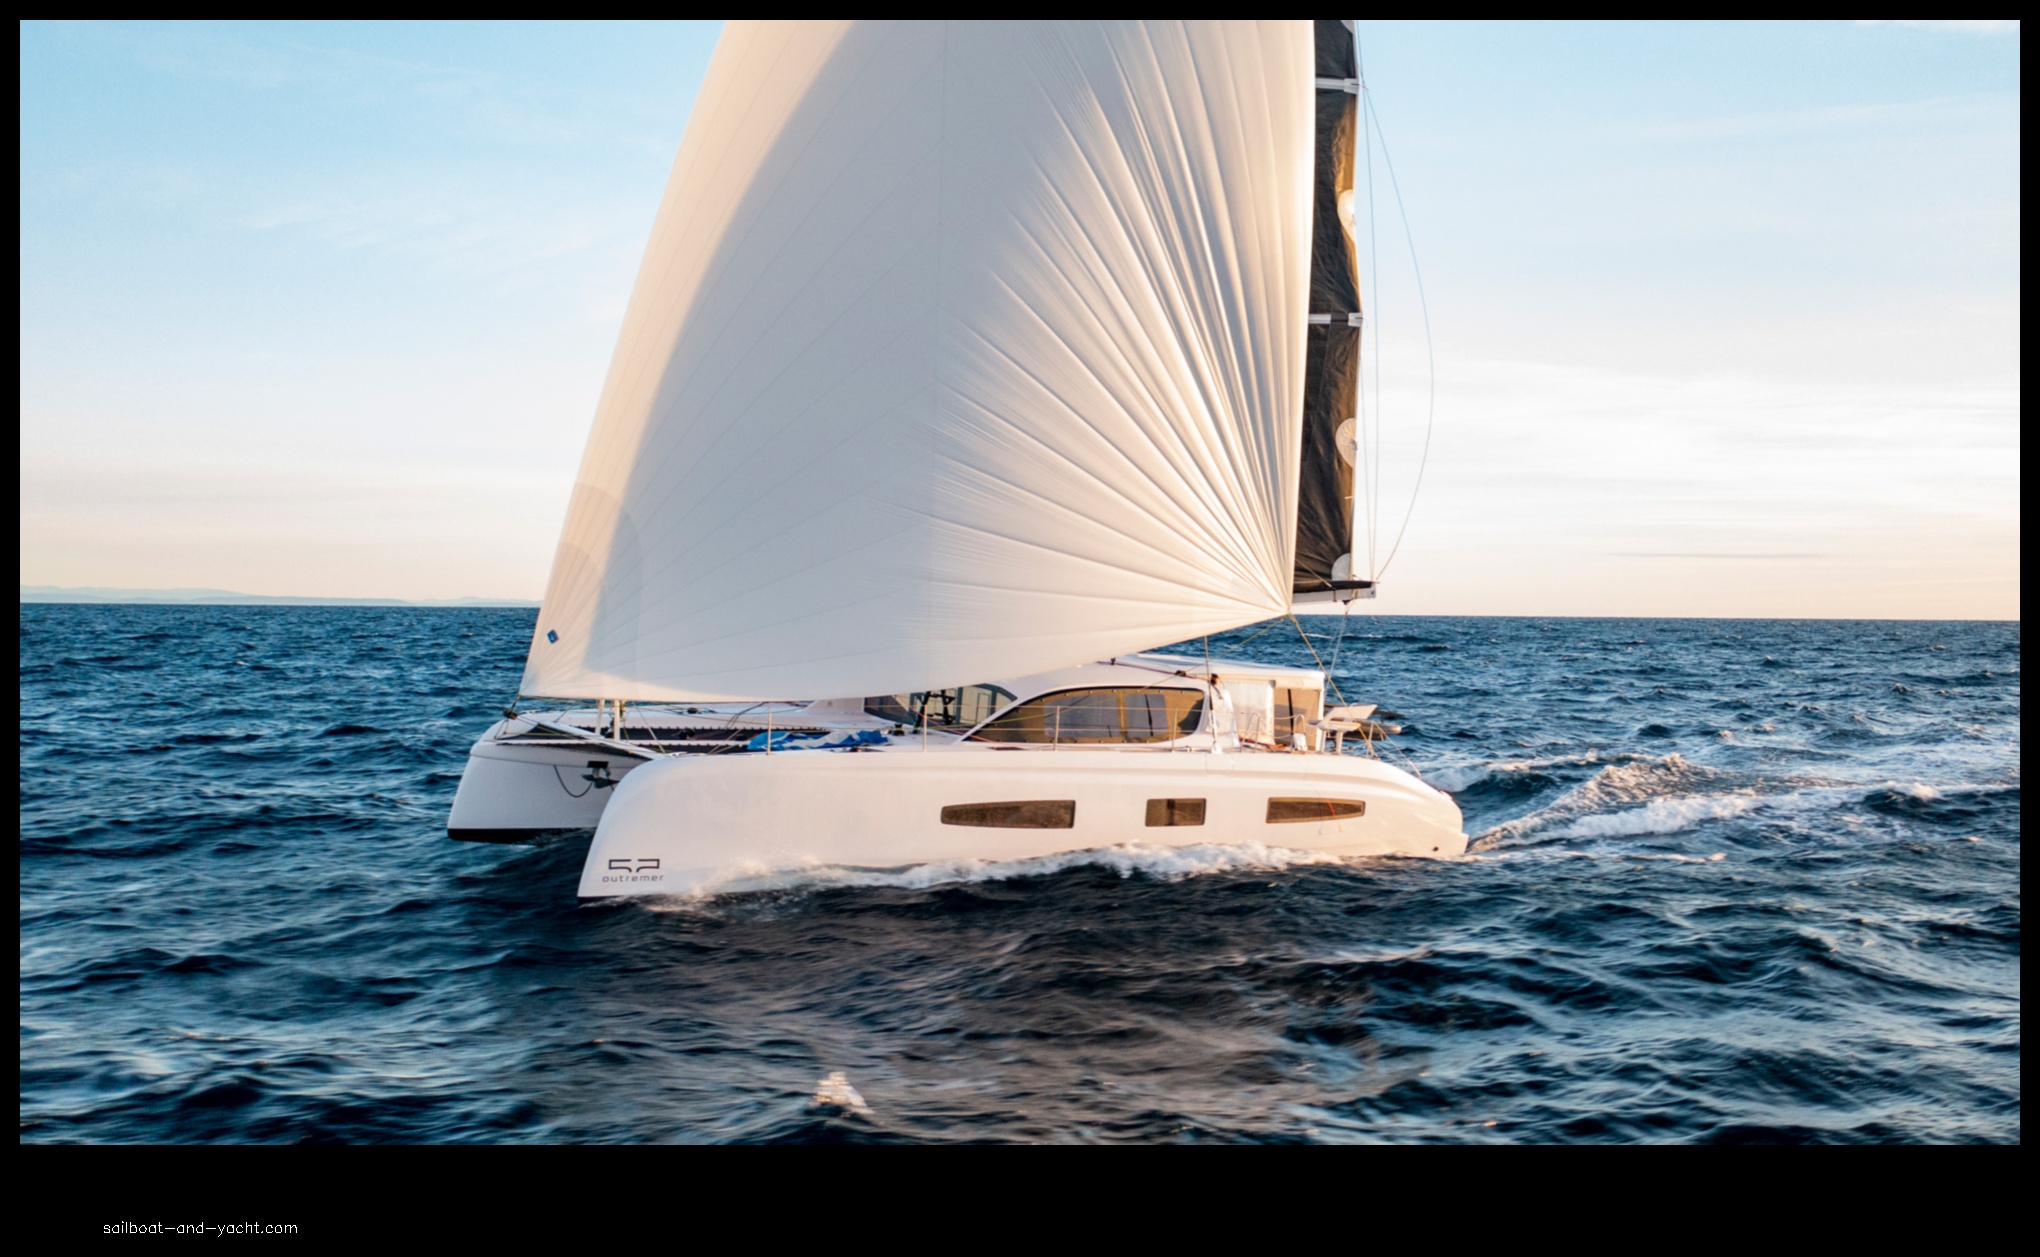 outremer 52 ocean boat